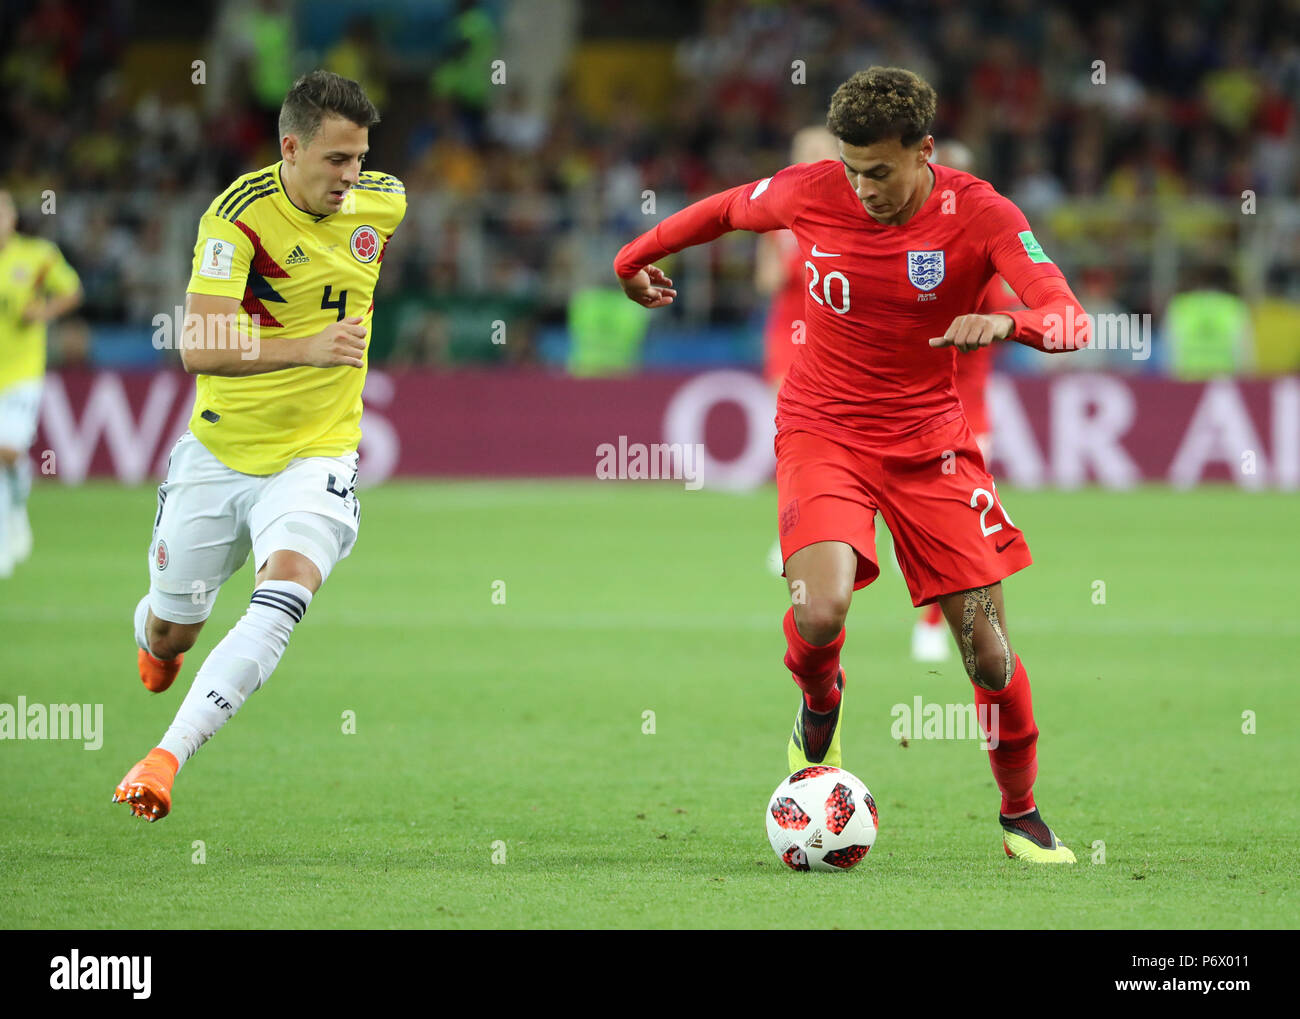 Moscow, Russia. 3rd July, 2018. Dele Alli (R) of England vies with Santiago Arias of Colombia during the 2018 FIFA World Cup round of 16 match between England and Colombia in Moscow, Russia, July 3, 2018. Credit: Bai Xueqi/Xinhua/Alamy Live News Stock Photo